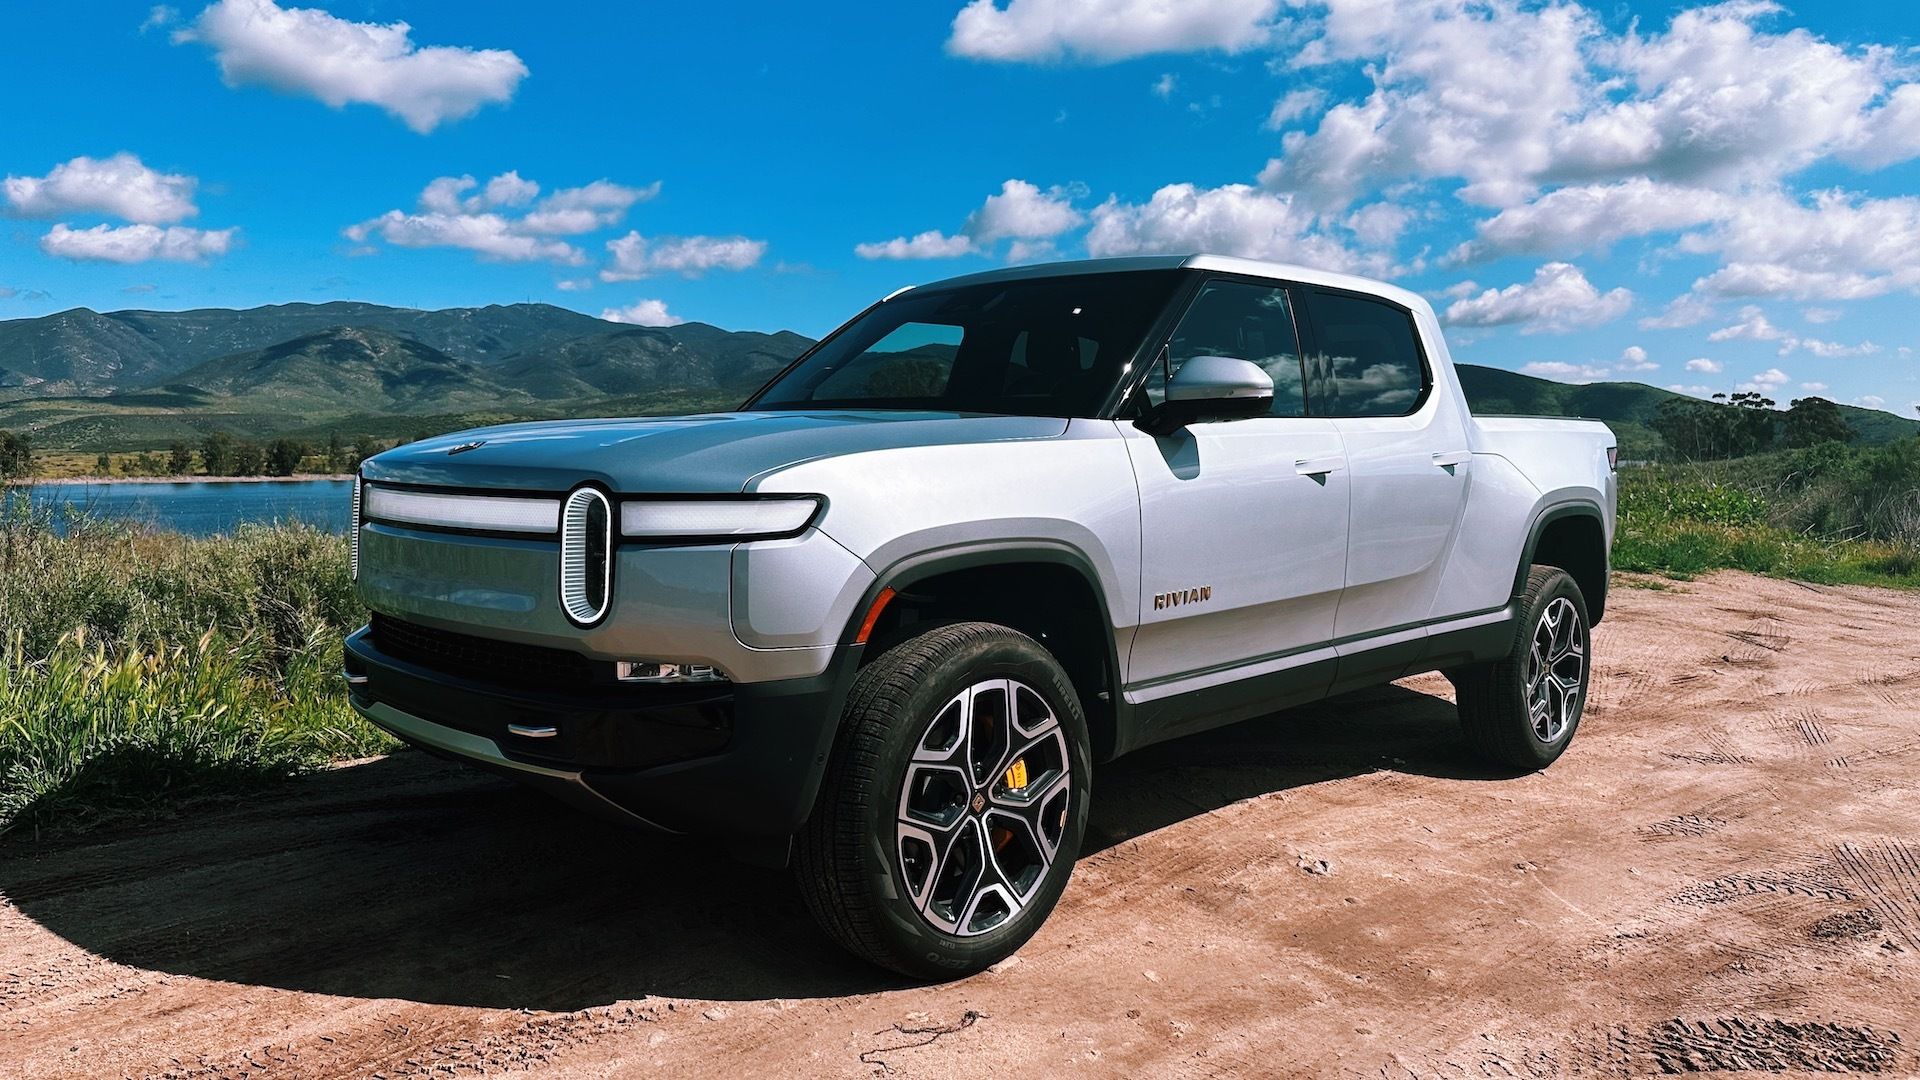 Rivian's R1T electric truck is parked off-road by a lake in the mountains. 